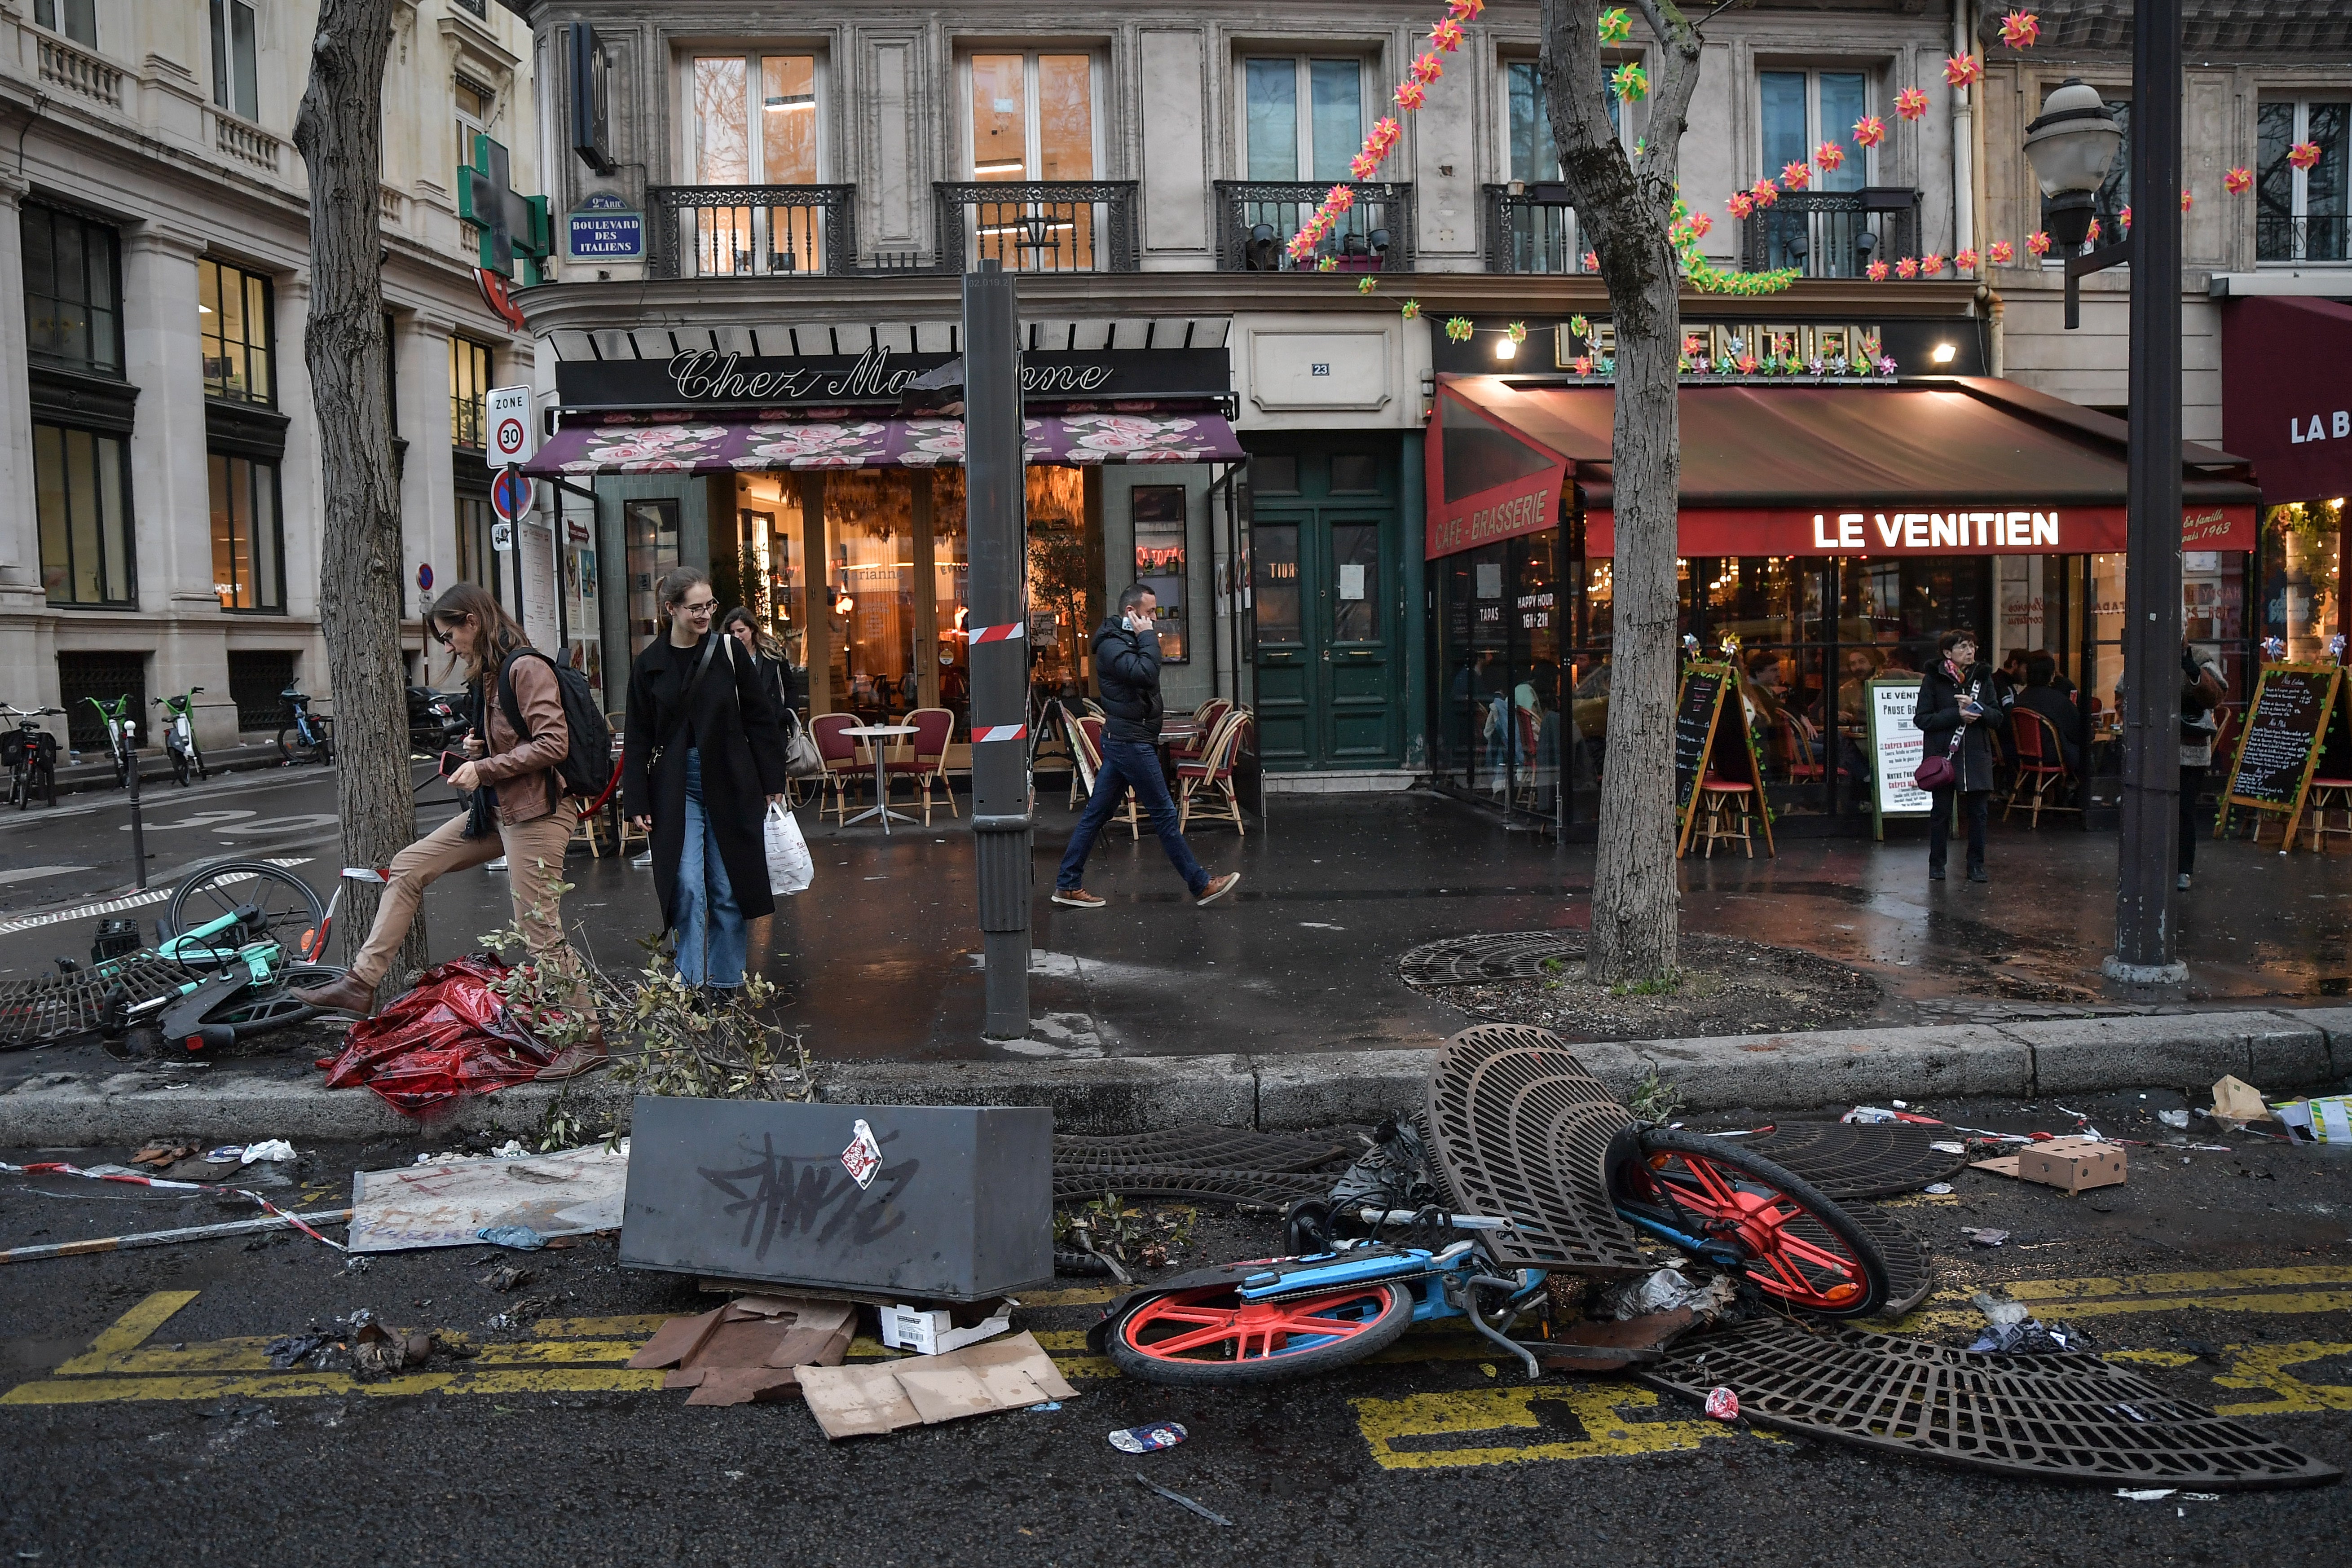 Pedestrians walk past damaged local properties after yesterday’s protests against the pensions reform in Paris